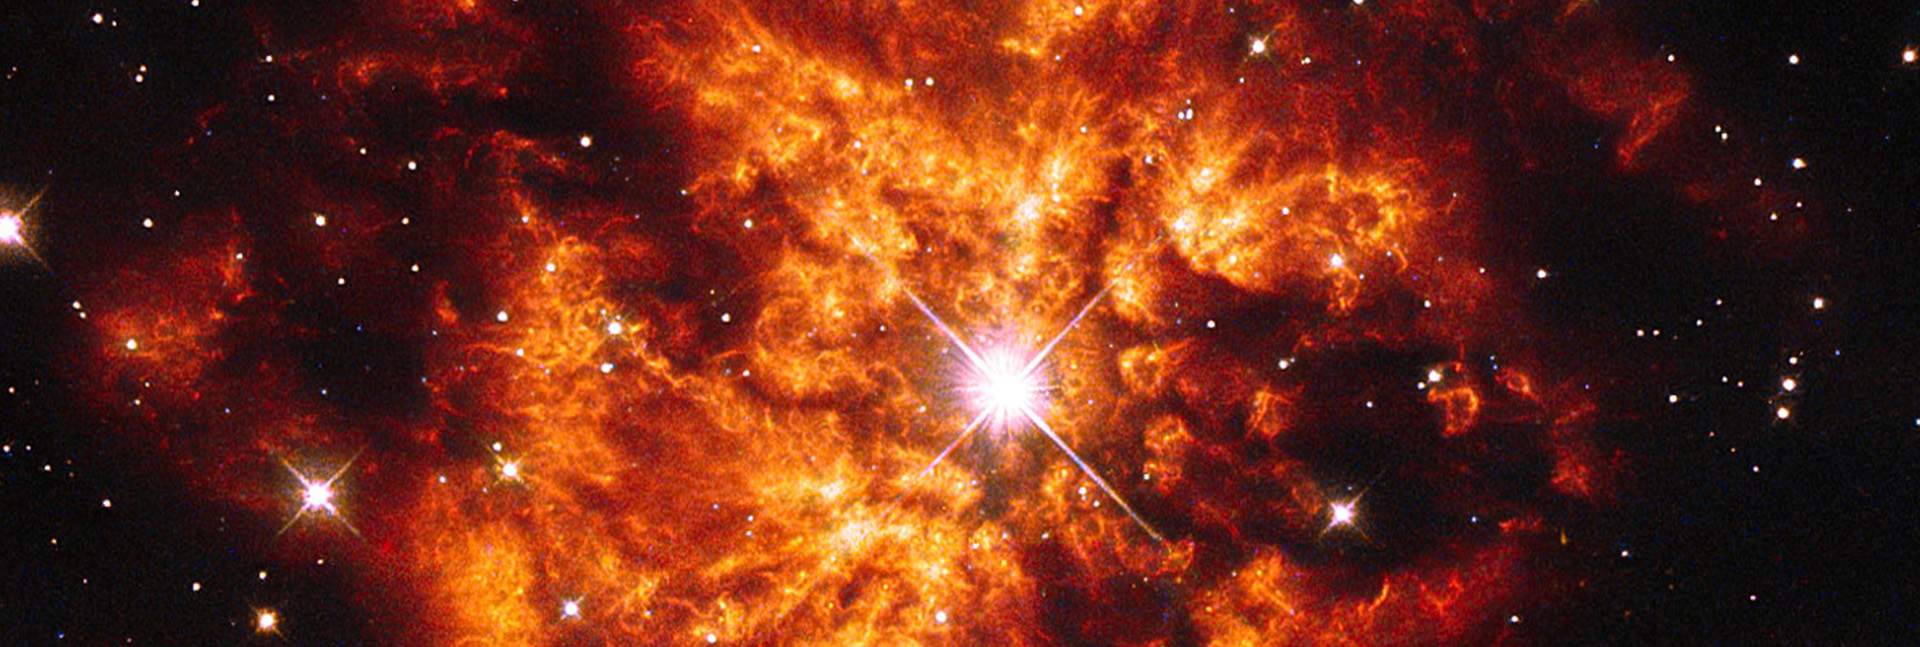 A Wolf-Rayet star and the nebula surrounding it captured by the Hubble Space Telescope. Gal-Yam and colleagues are the first to discover a rare-type supernova originating from this star // NASA/ESA Hubble Space Telescope